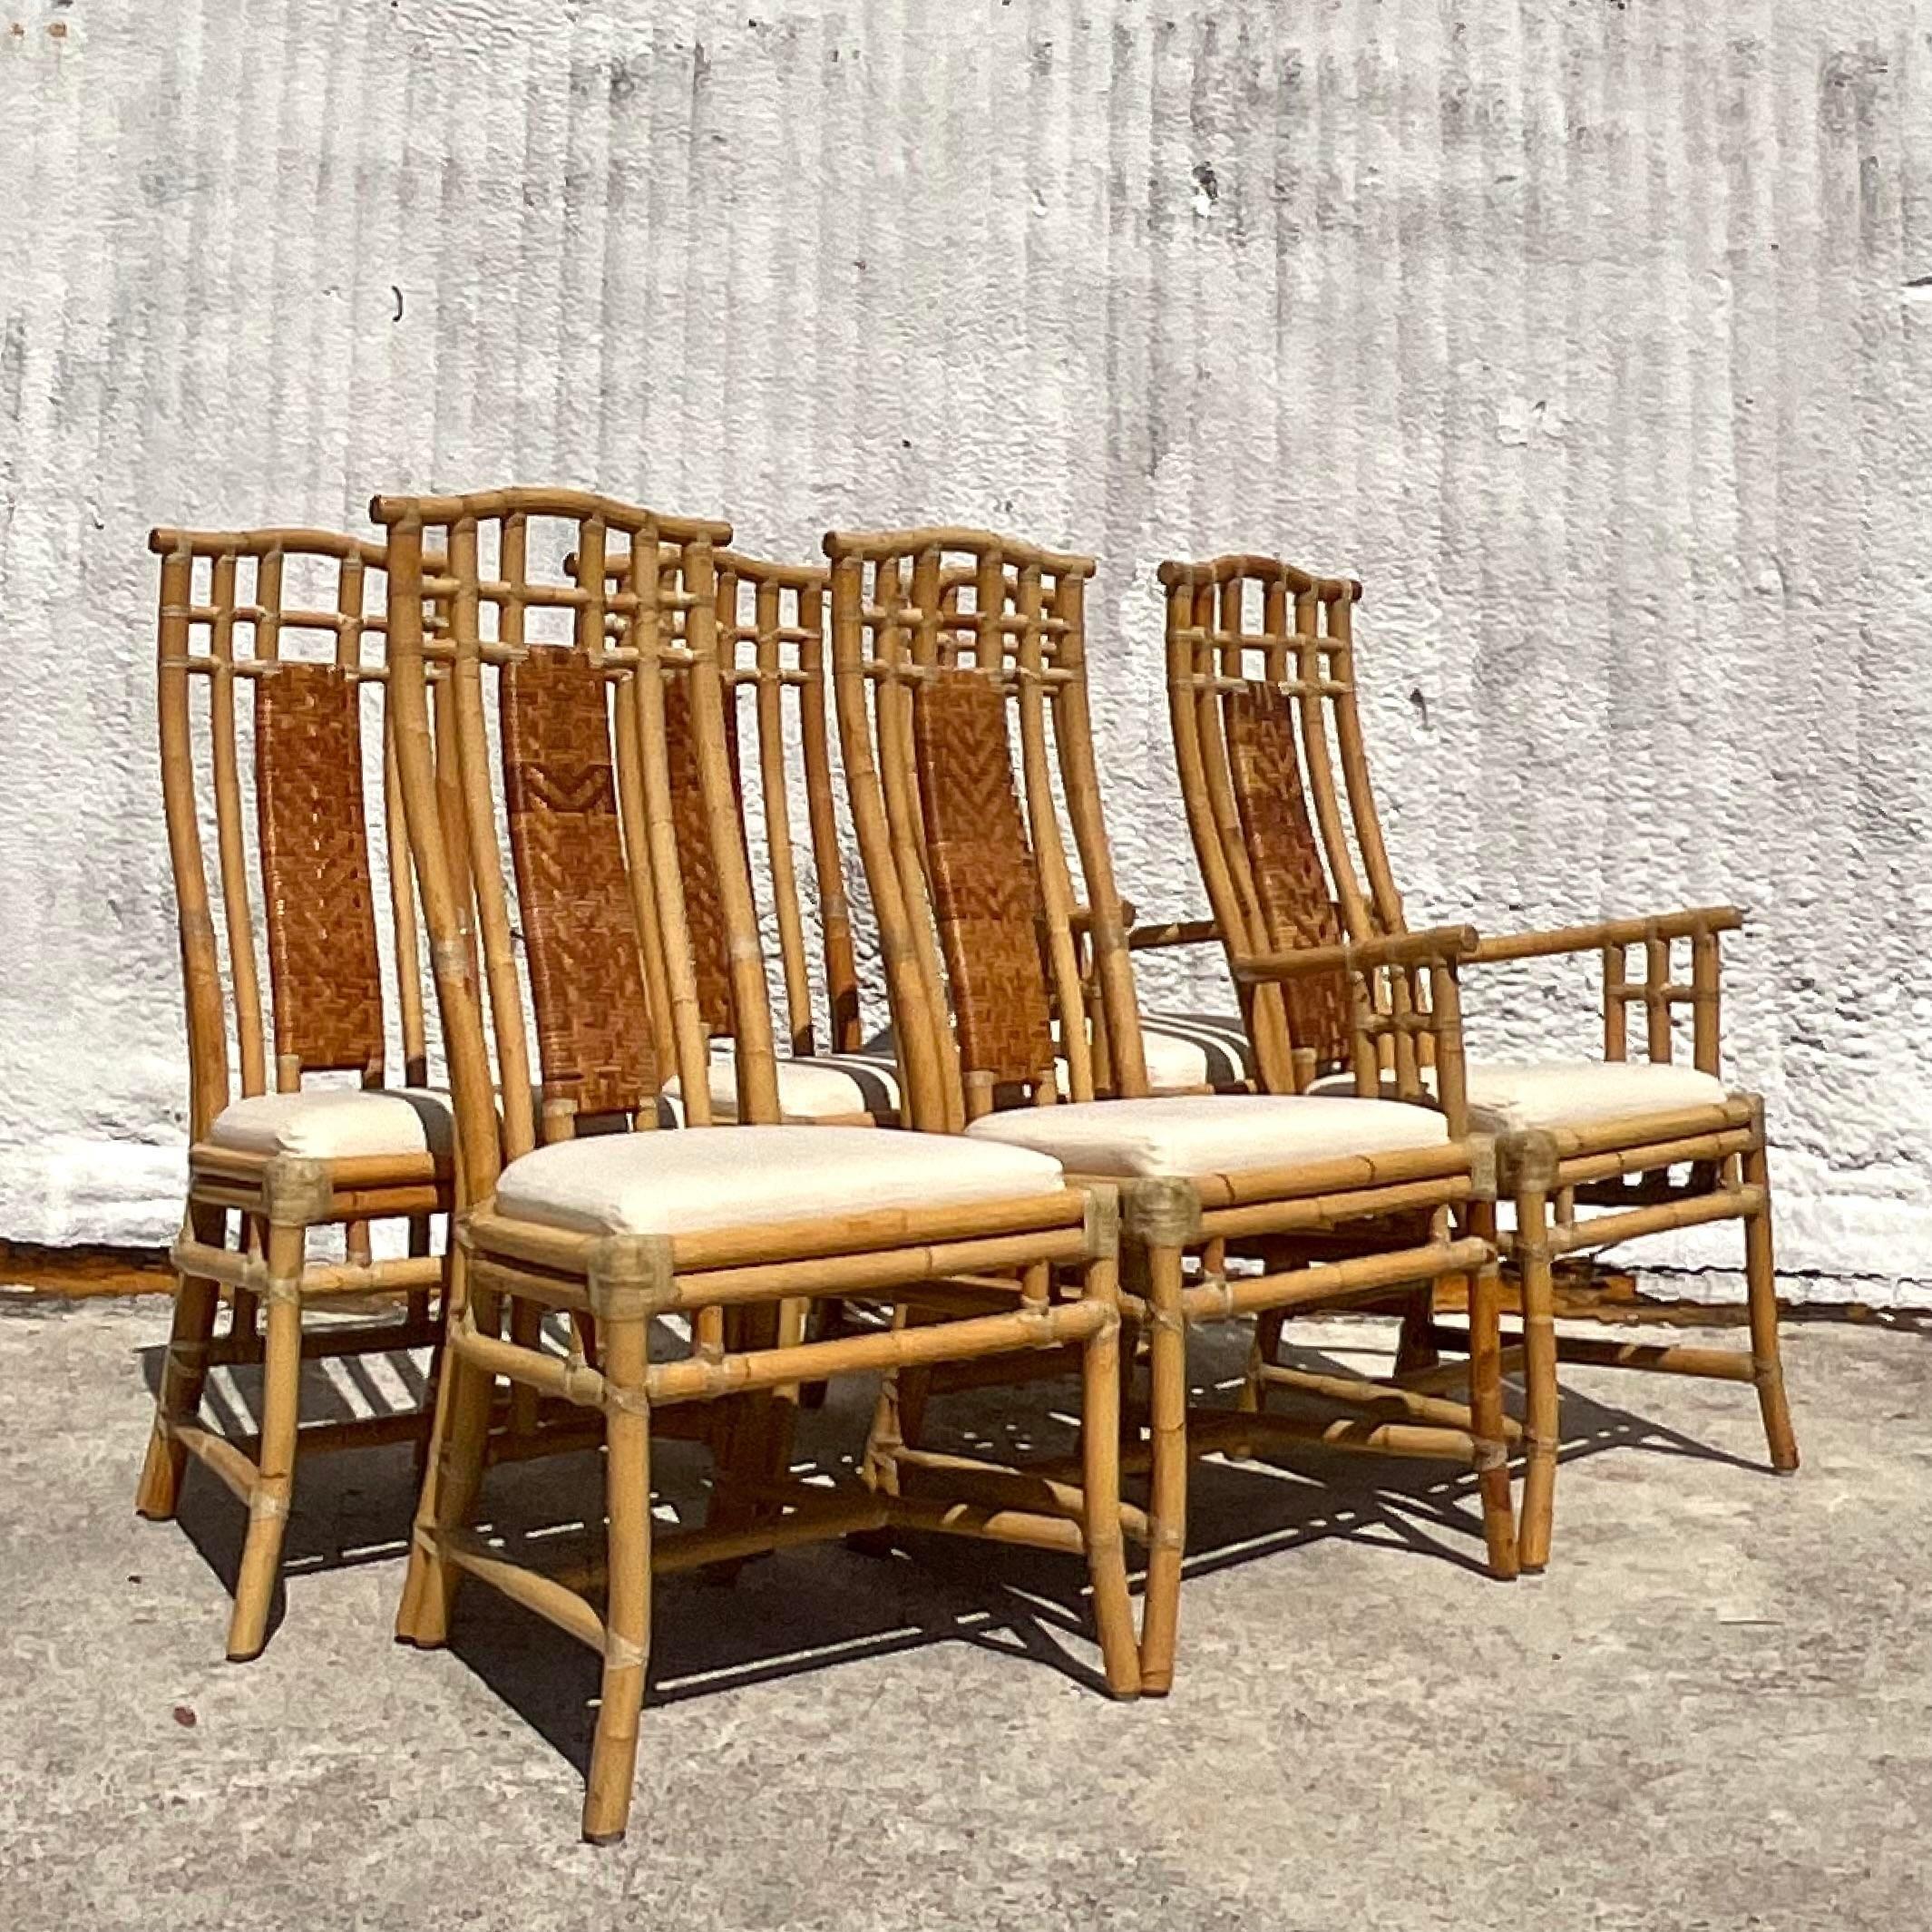 Vintage Coastal High Back Woven Rattan Chairs - Set of 6 In Good Condition For Sale In west palm beach, FL